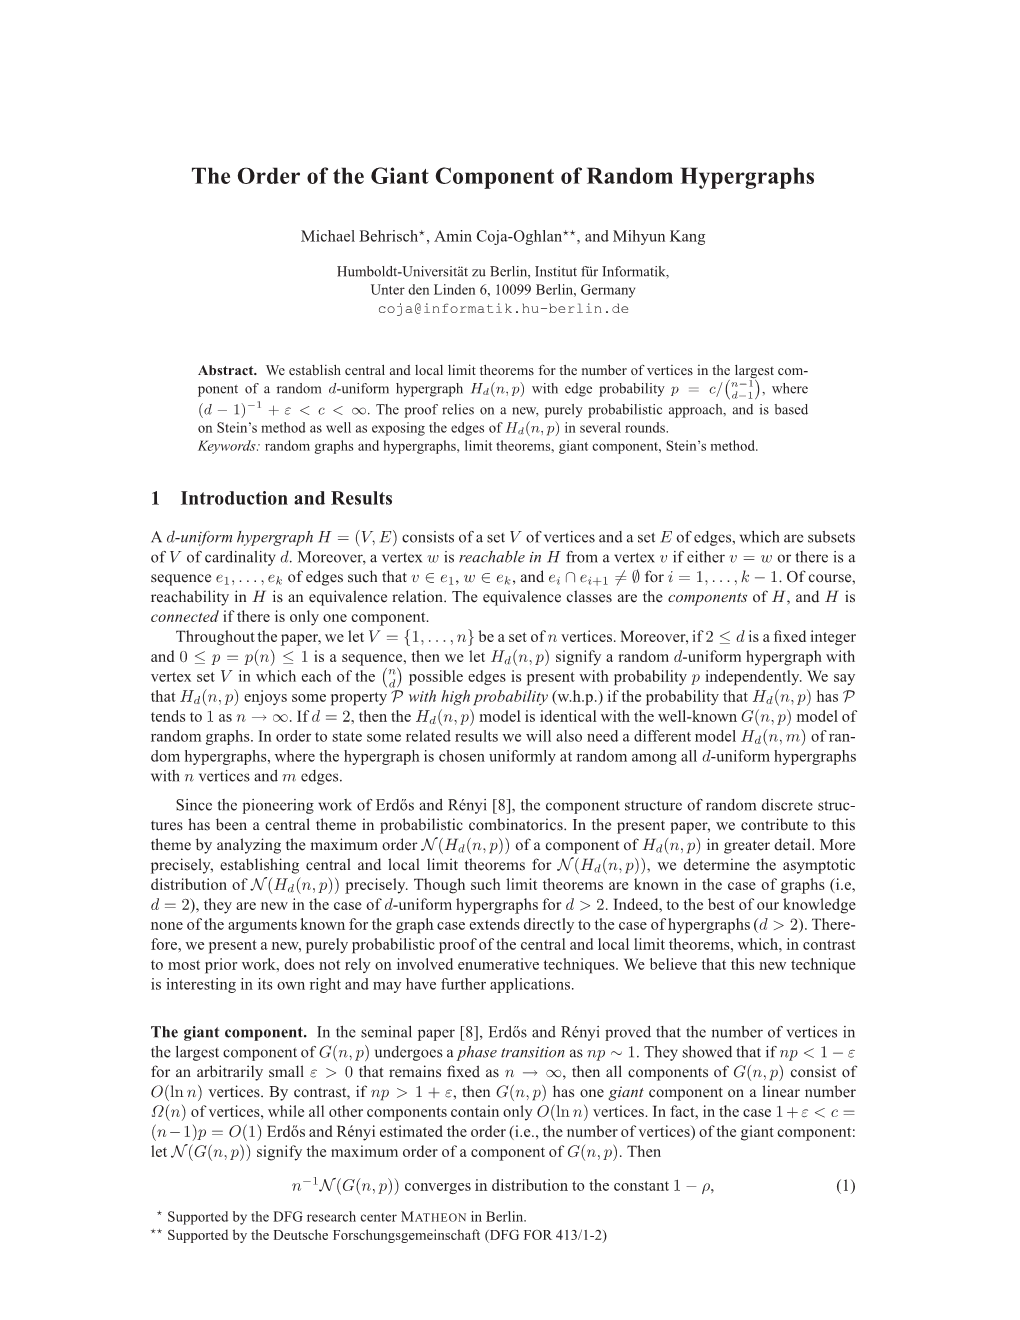 The Order of the Giant Component of Random Hypergraphs